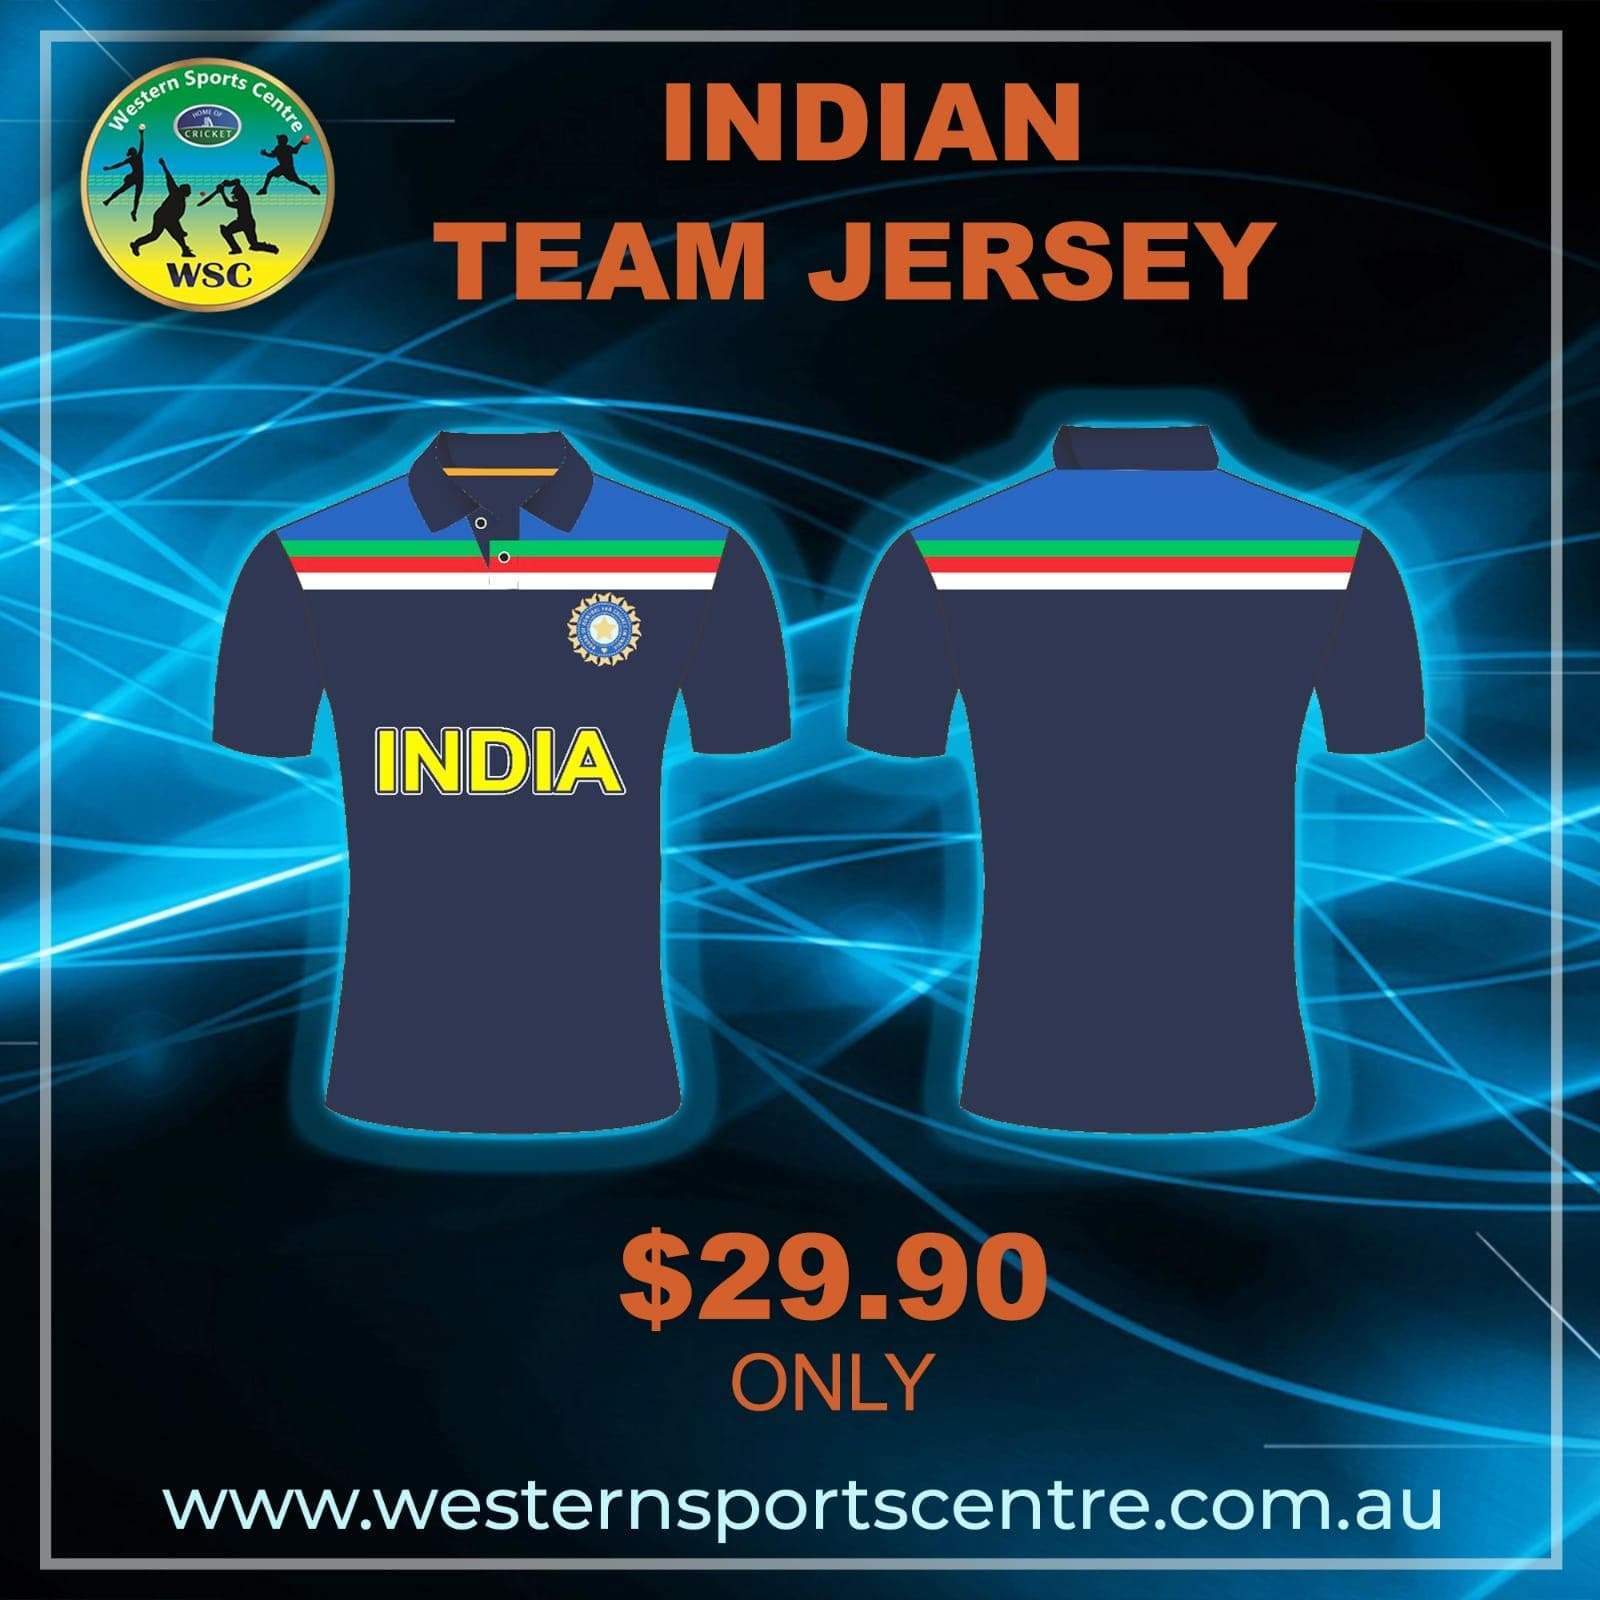 WSC Clothing Indian Cricket Team Replica Shirt with Flag